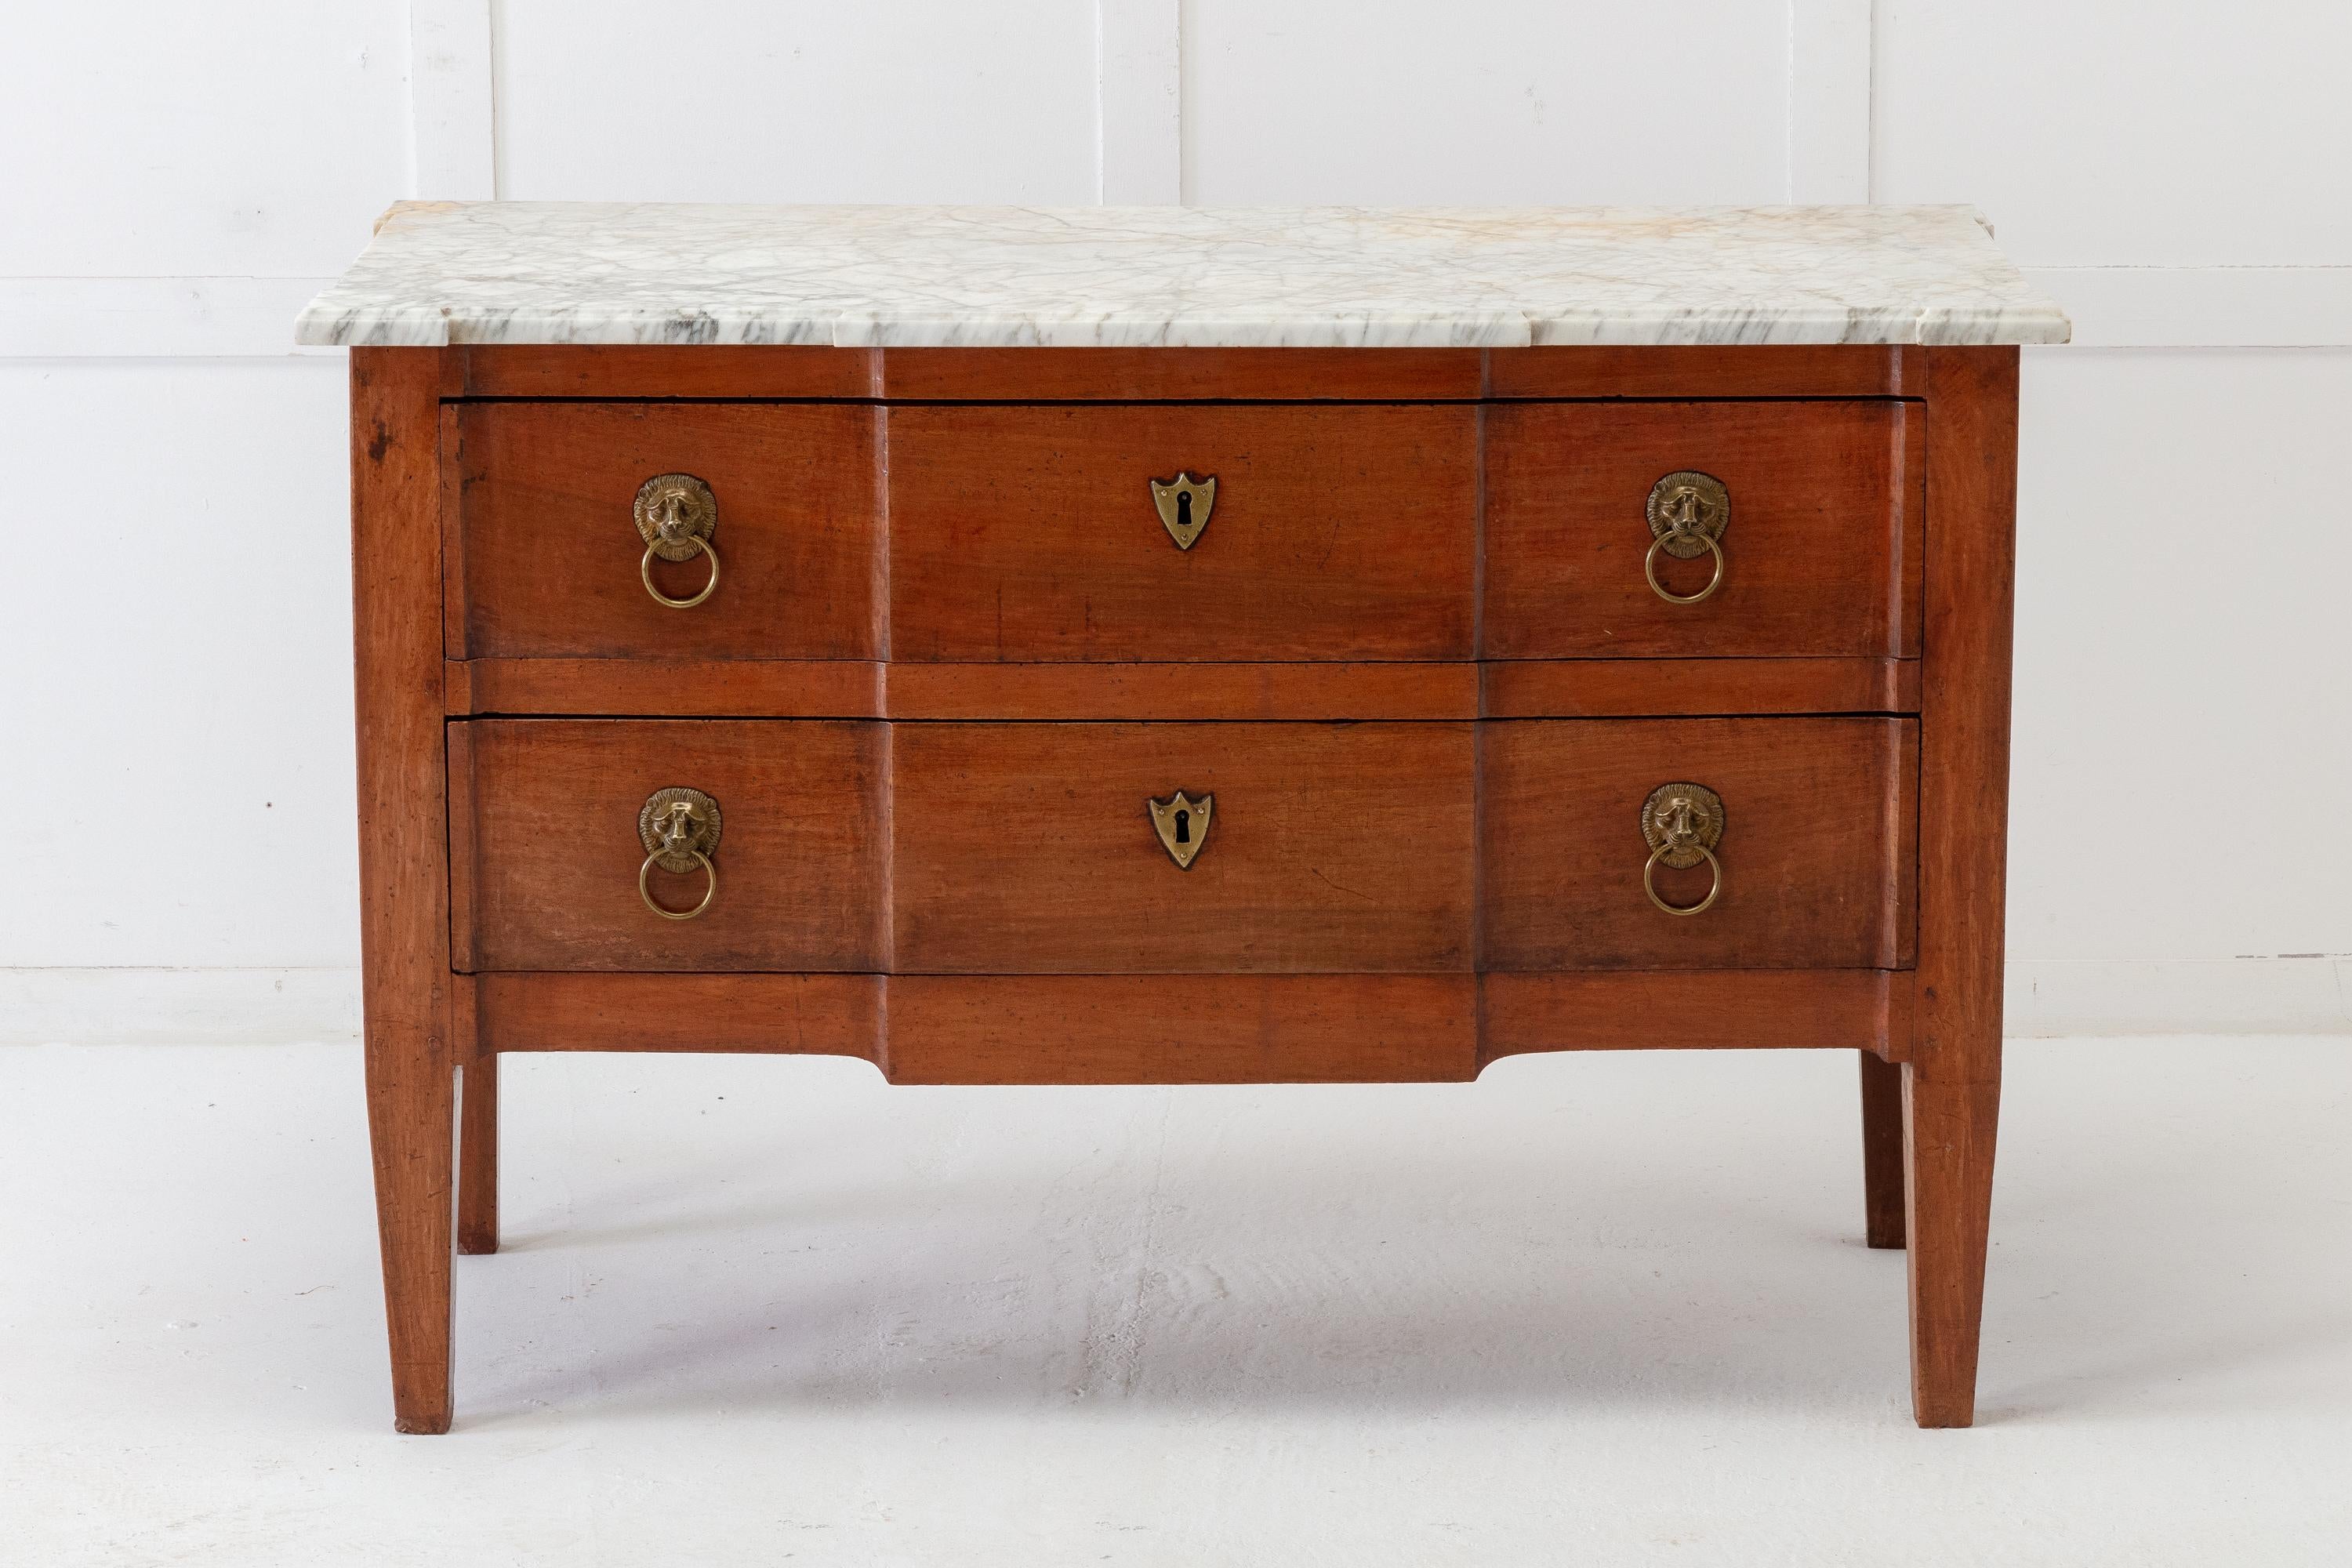 18th century French, breakfront, walnut chest of drawers with original marble top. Having two drawers with lion's head pull handles. The sides are panelled. Terminating on square tapering legs.
 